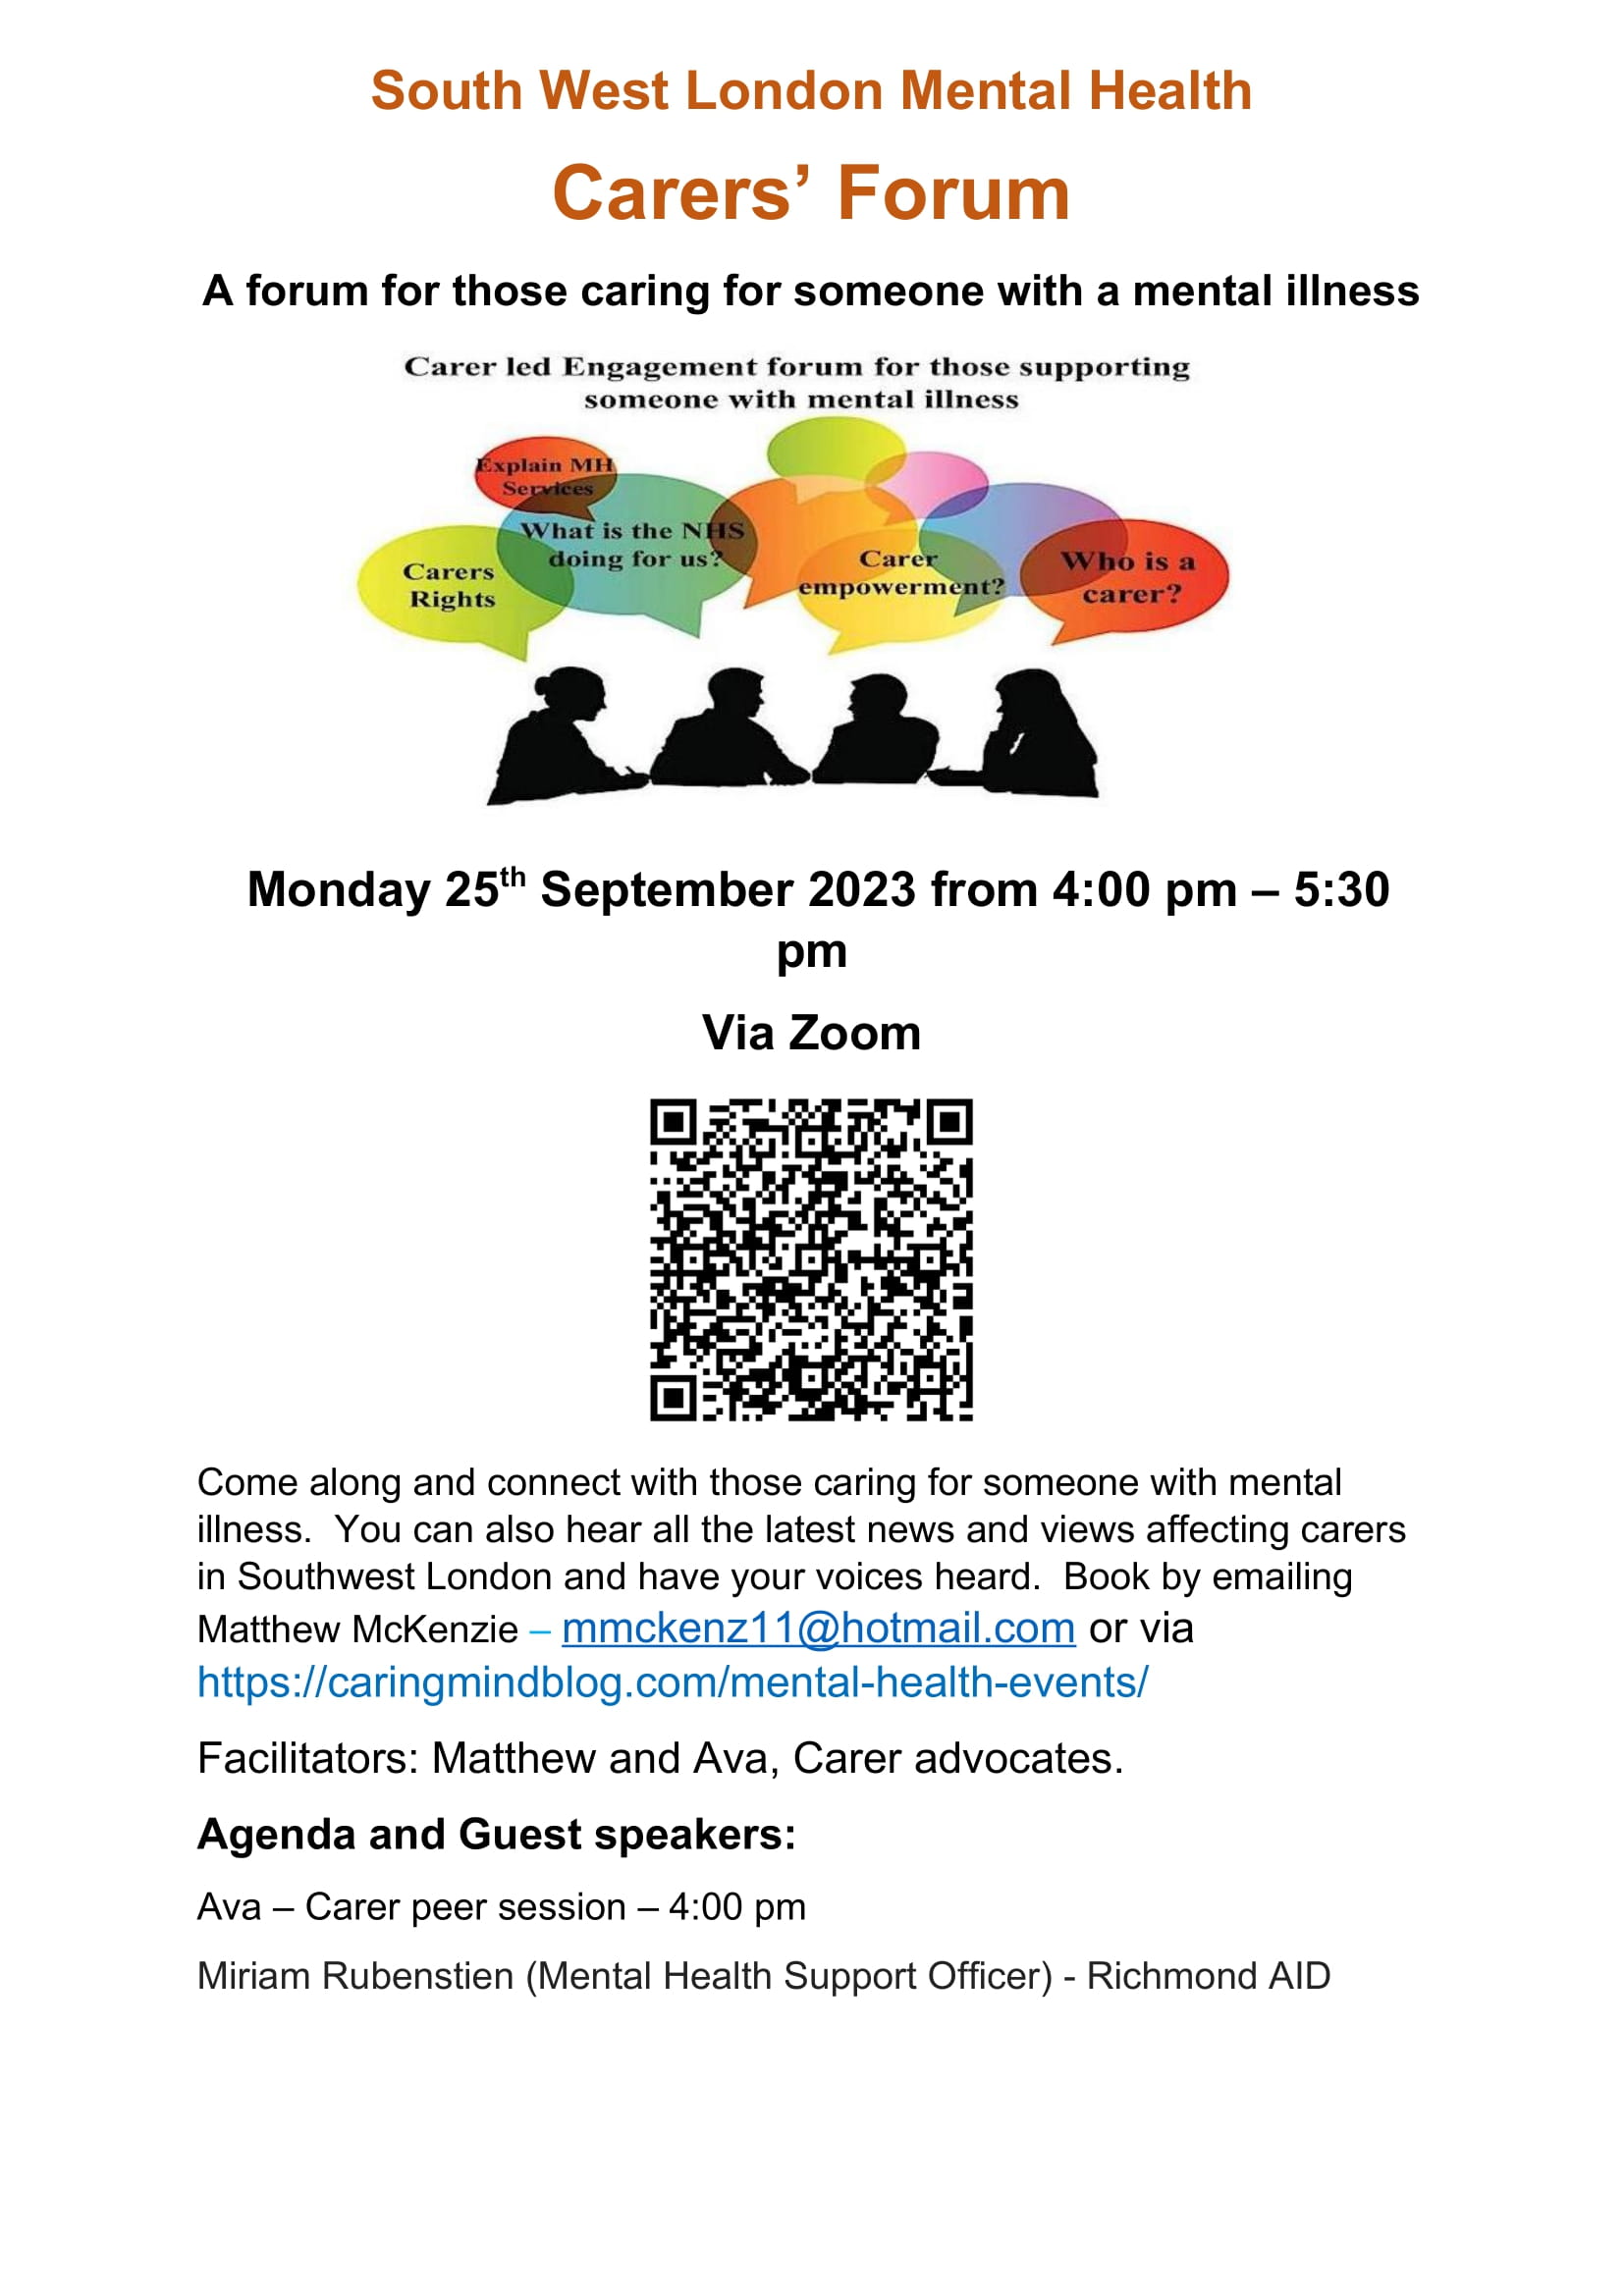 25th September 2023 - South West London Mental Health Carers’ Forum